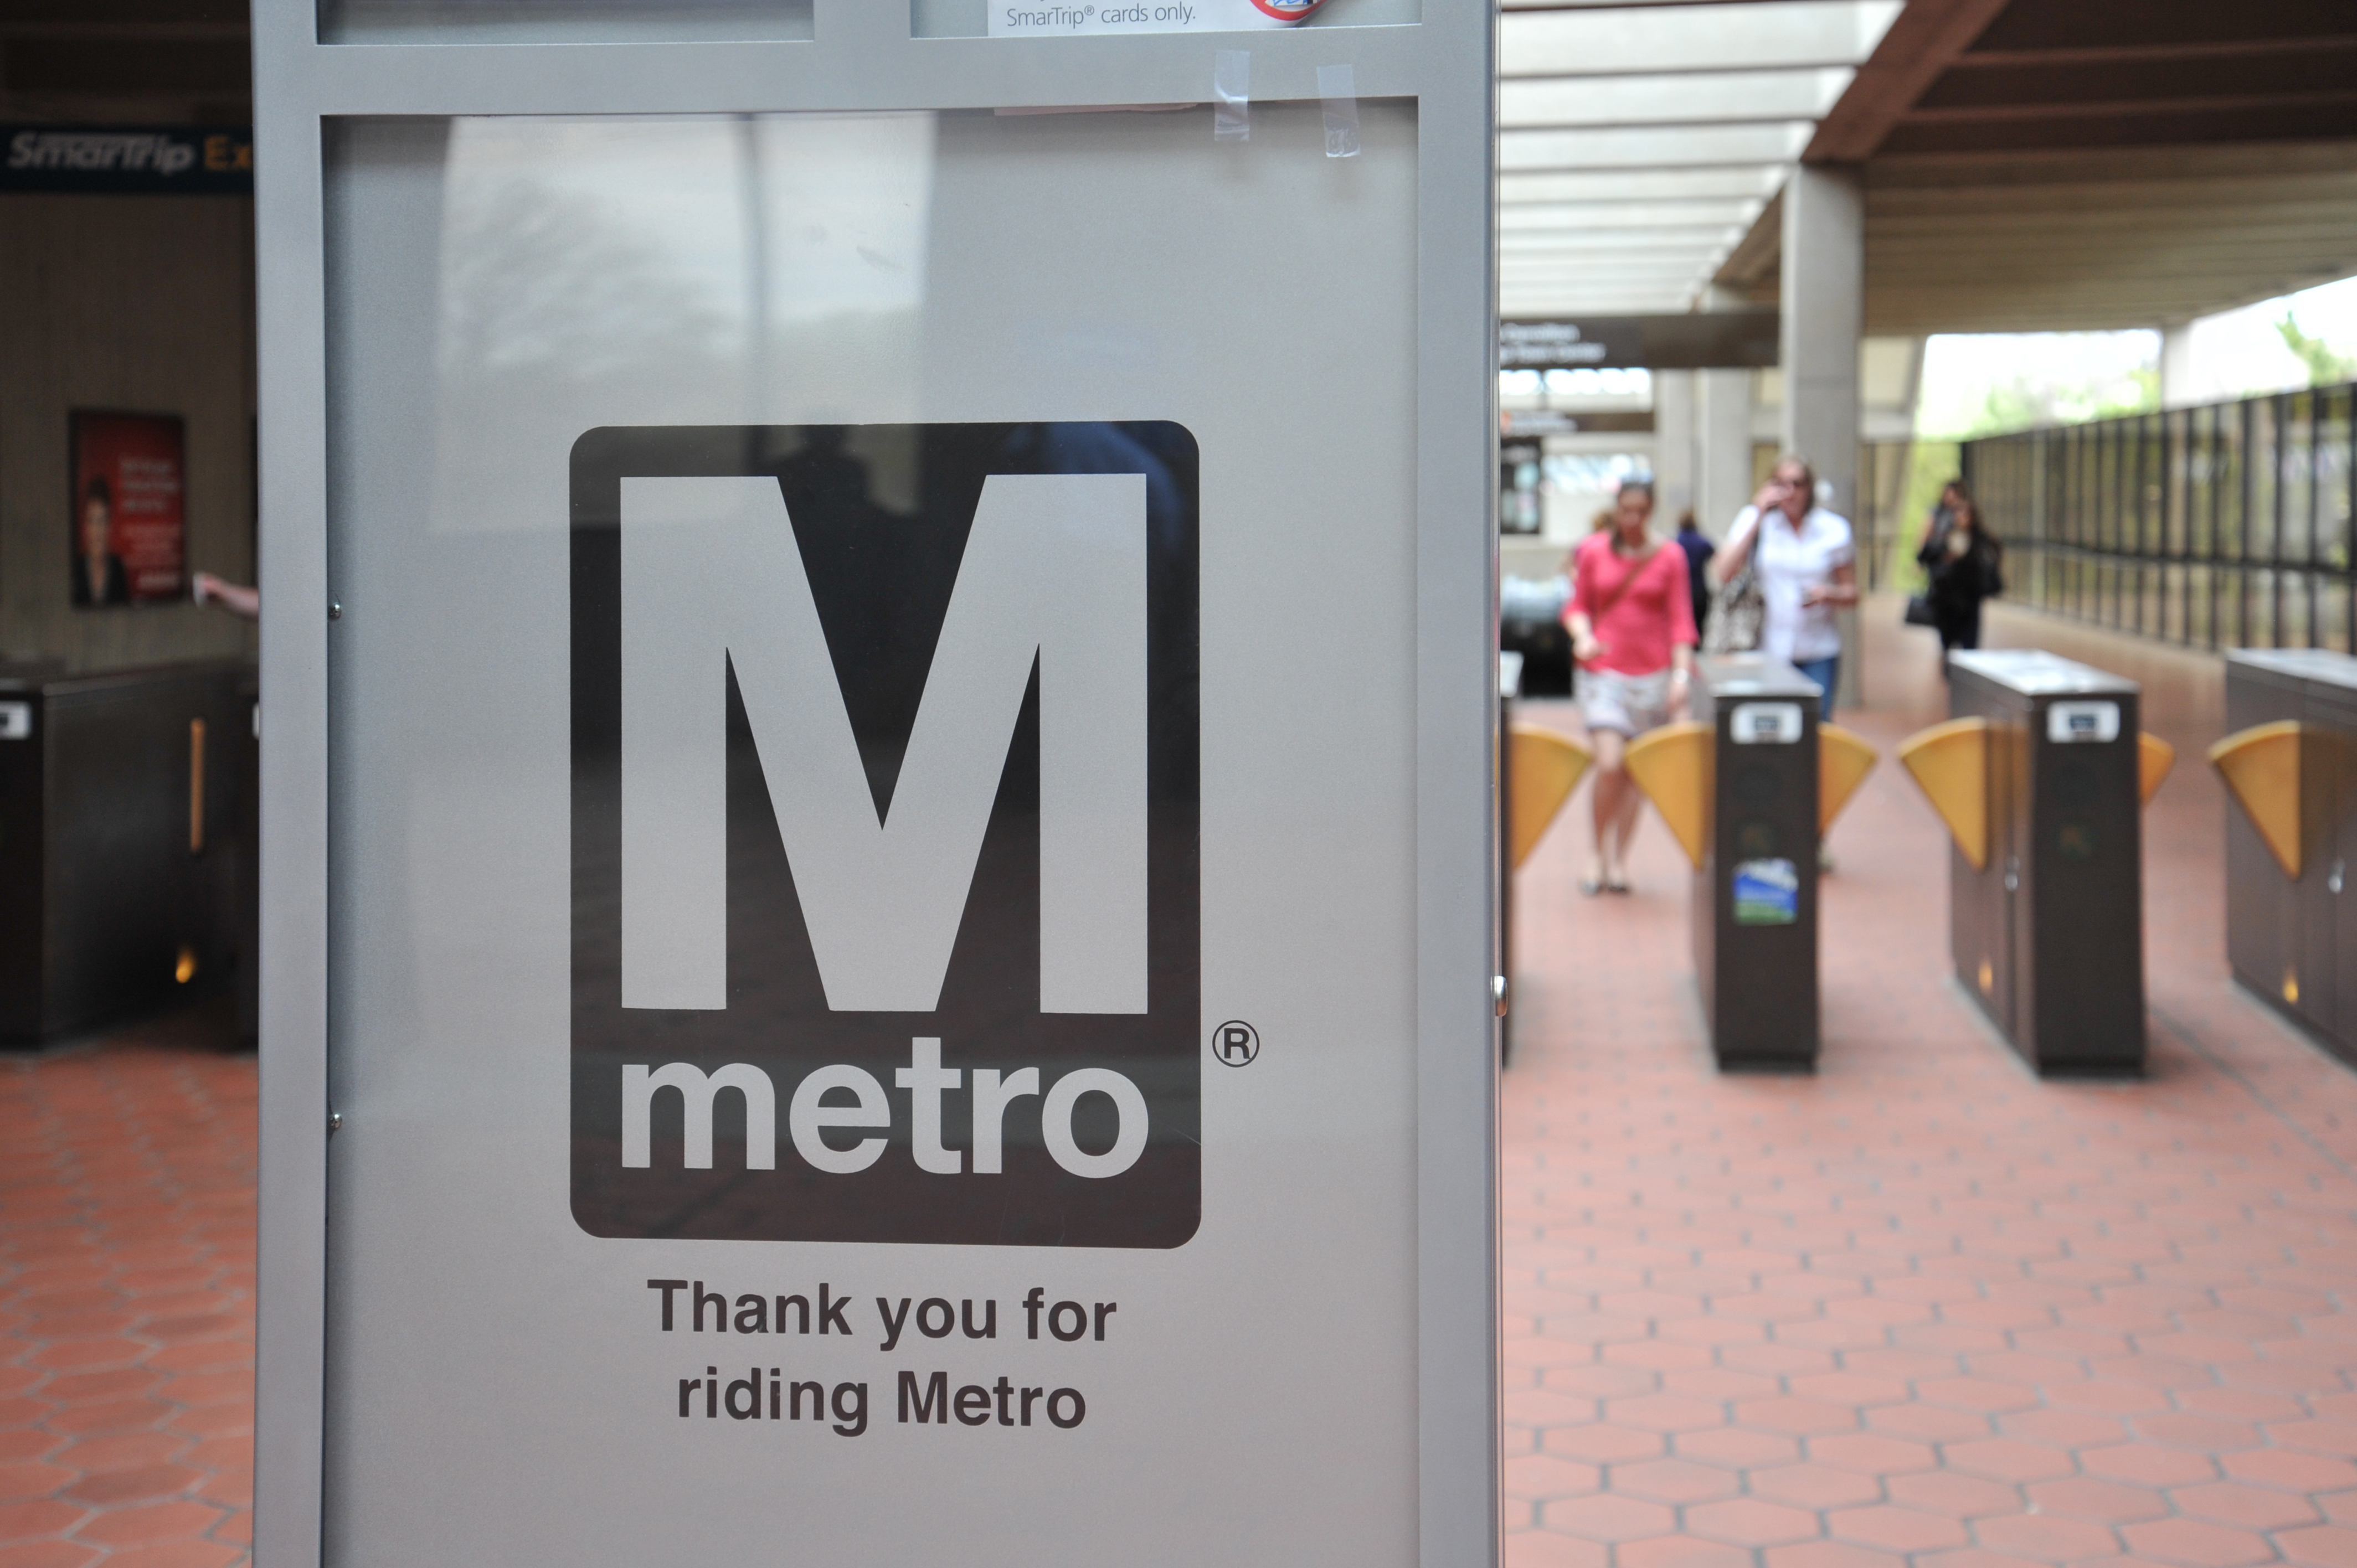 Metro to Give Update on Train Service, Safety After Derailment